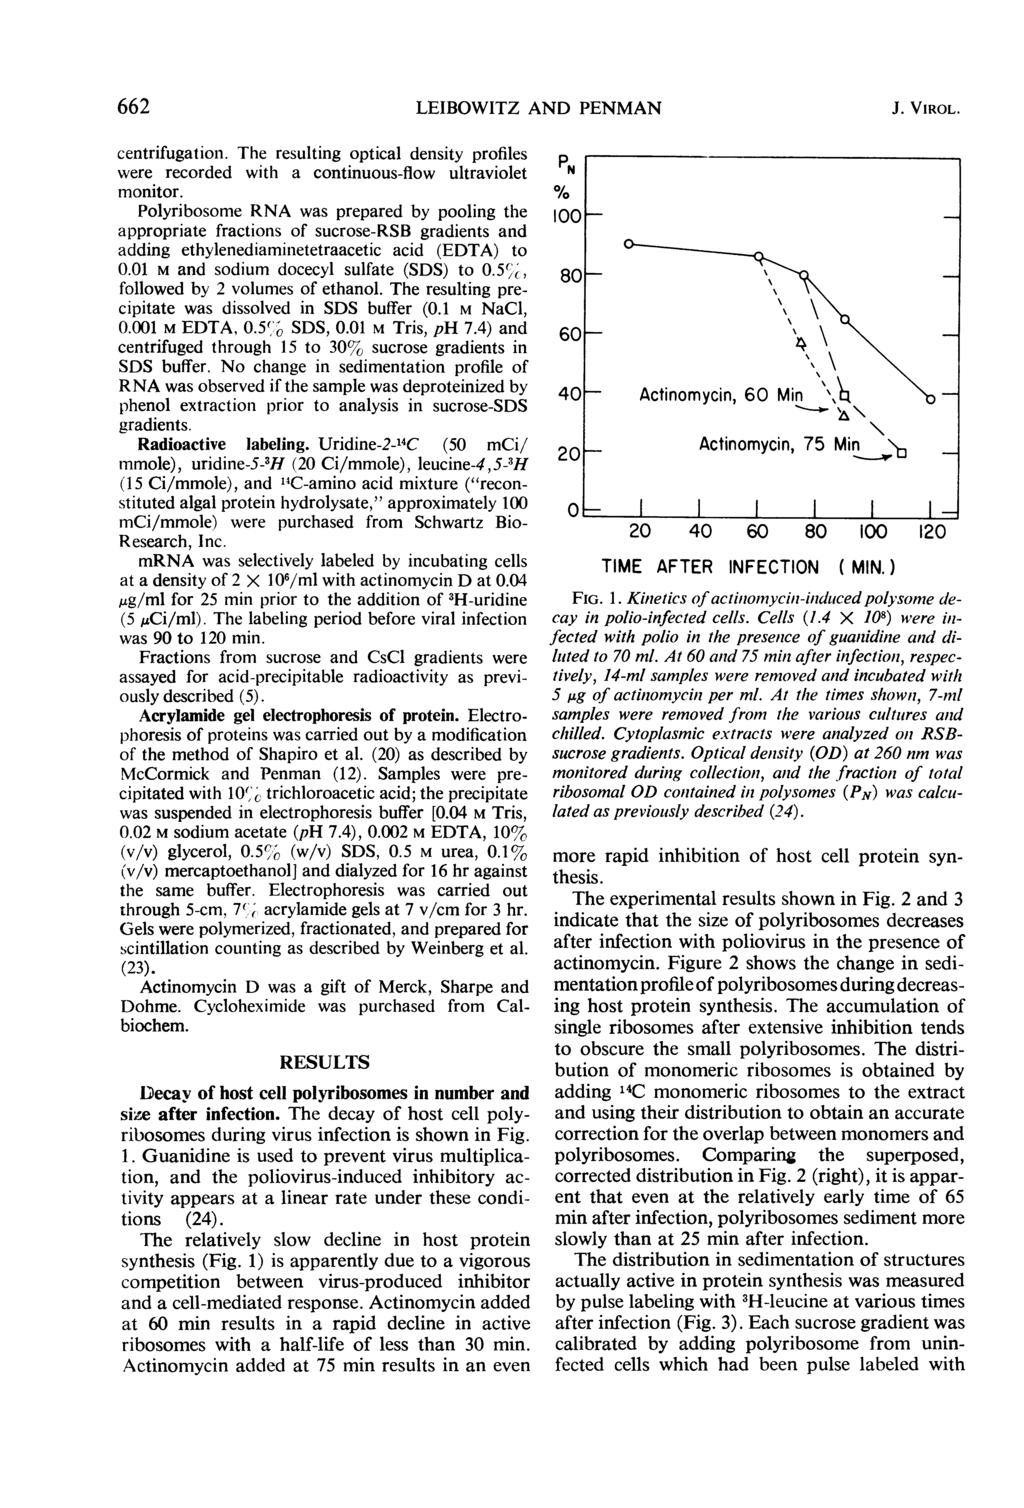 662 LEIBOWITZ AND PENMAN J. VIROL. centrifugation. The resulting optical density profiles were recorded with a continuous-flow ultraviolet monitor.